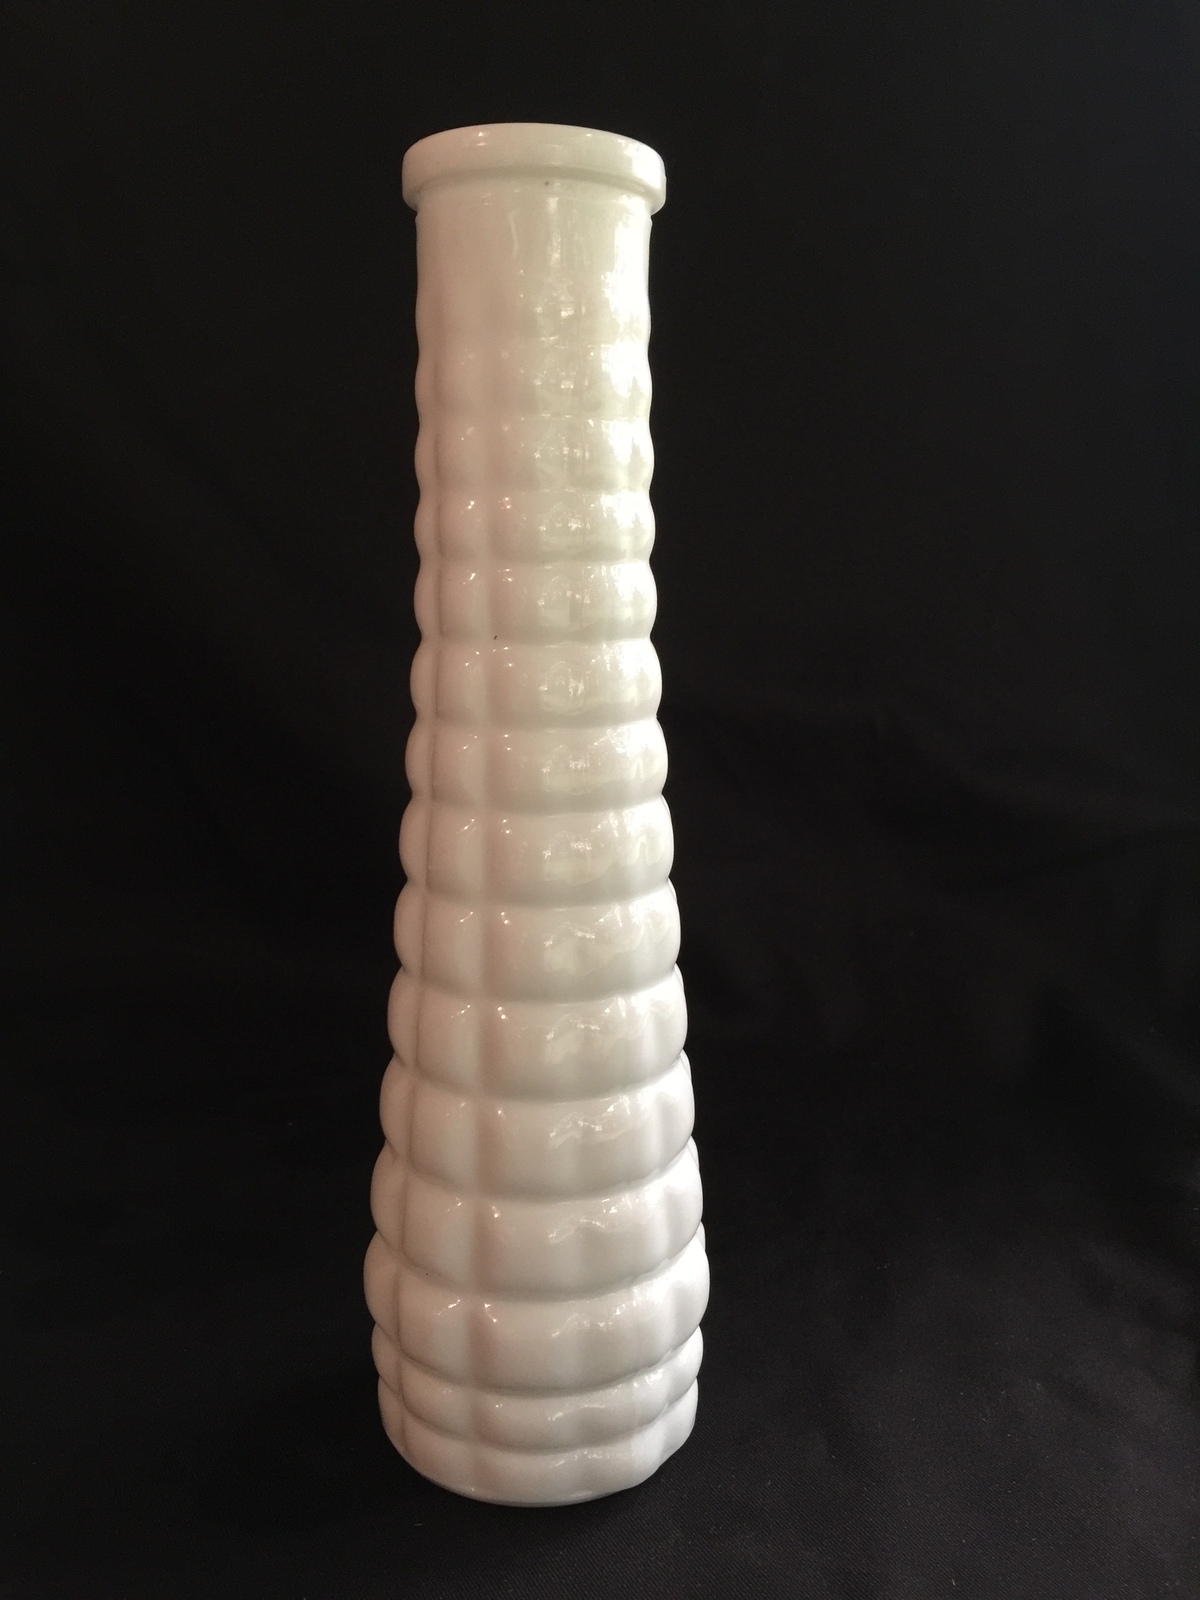 Primary image for  bud vase e o brody milk glass 1960s 9in tall